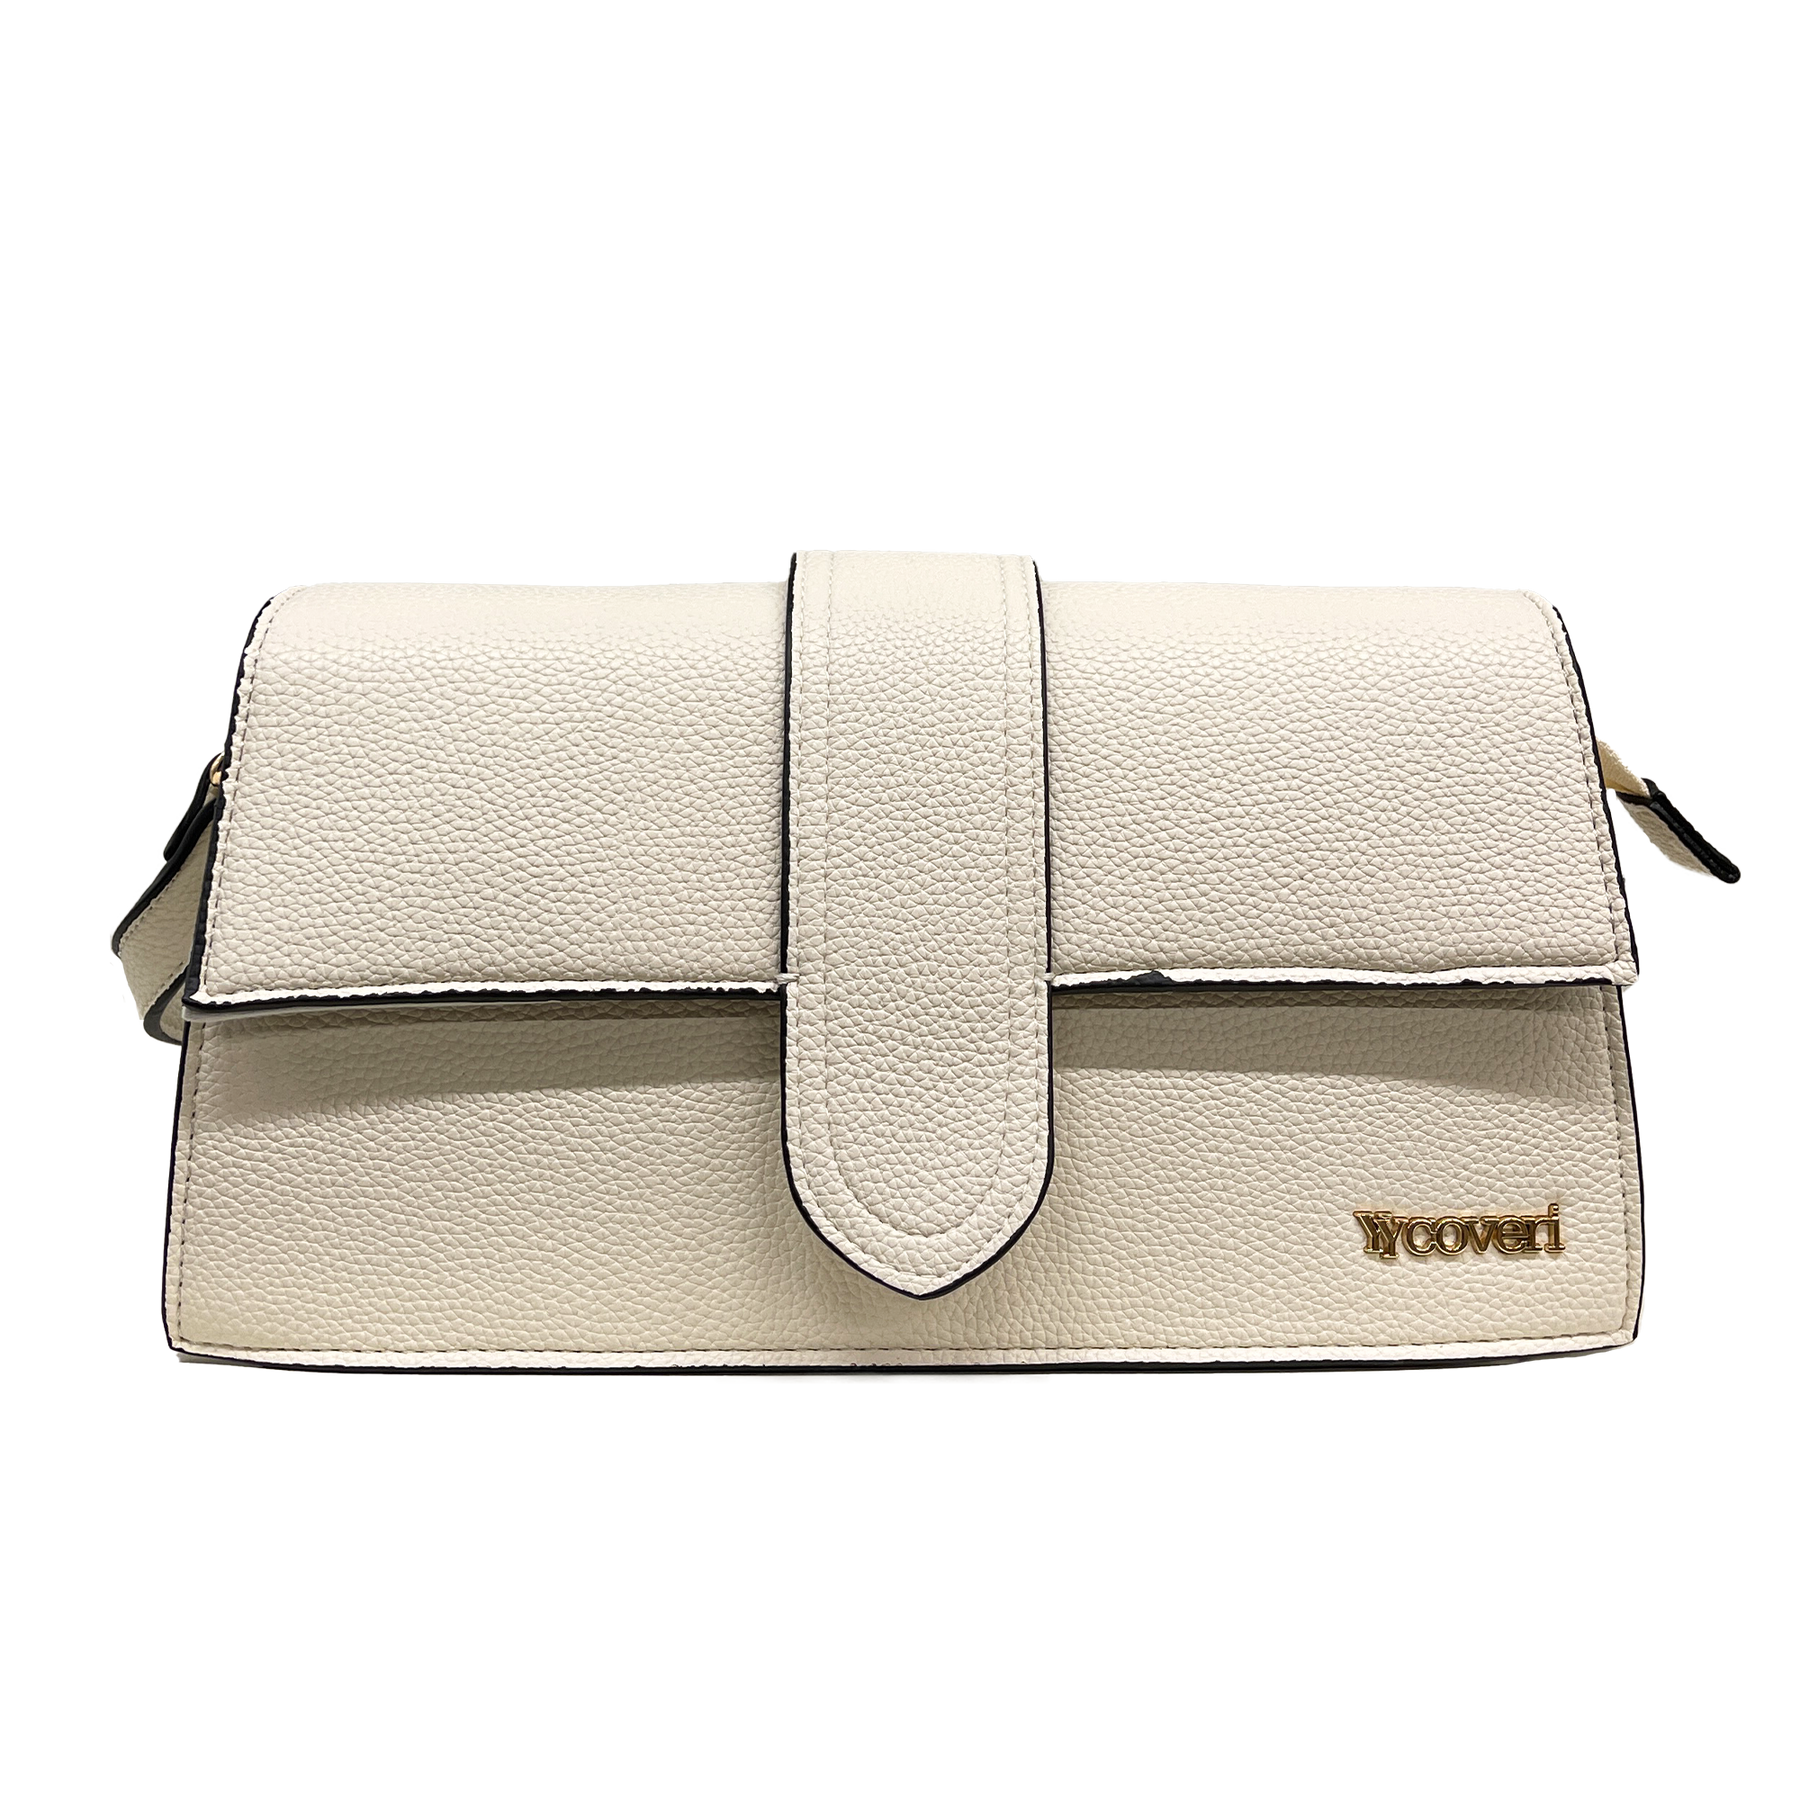 Chic and functional YY Coveri: shoulder bag